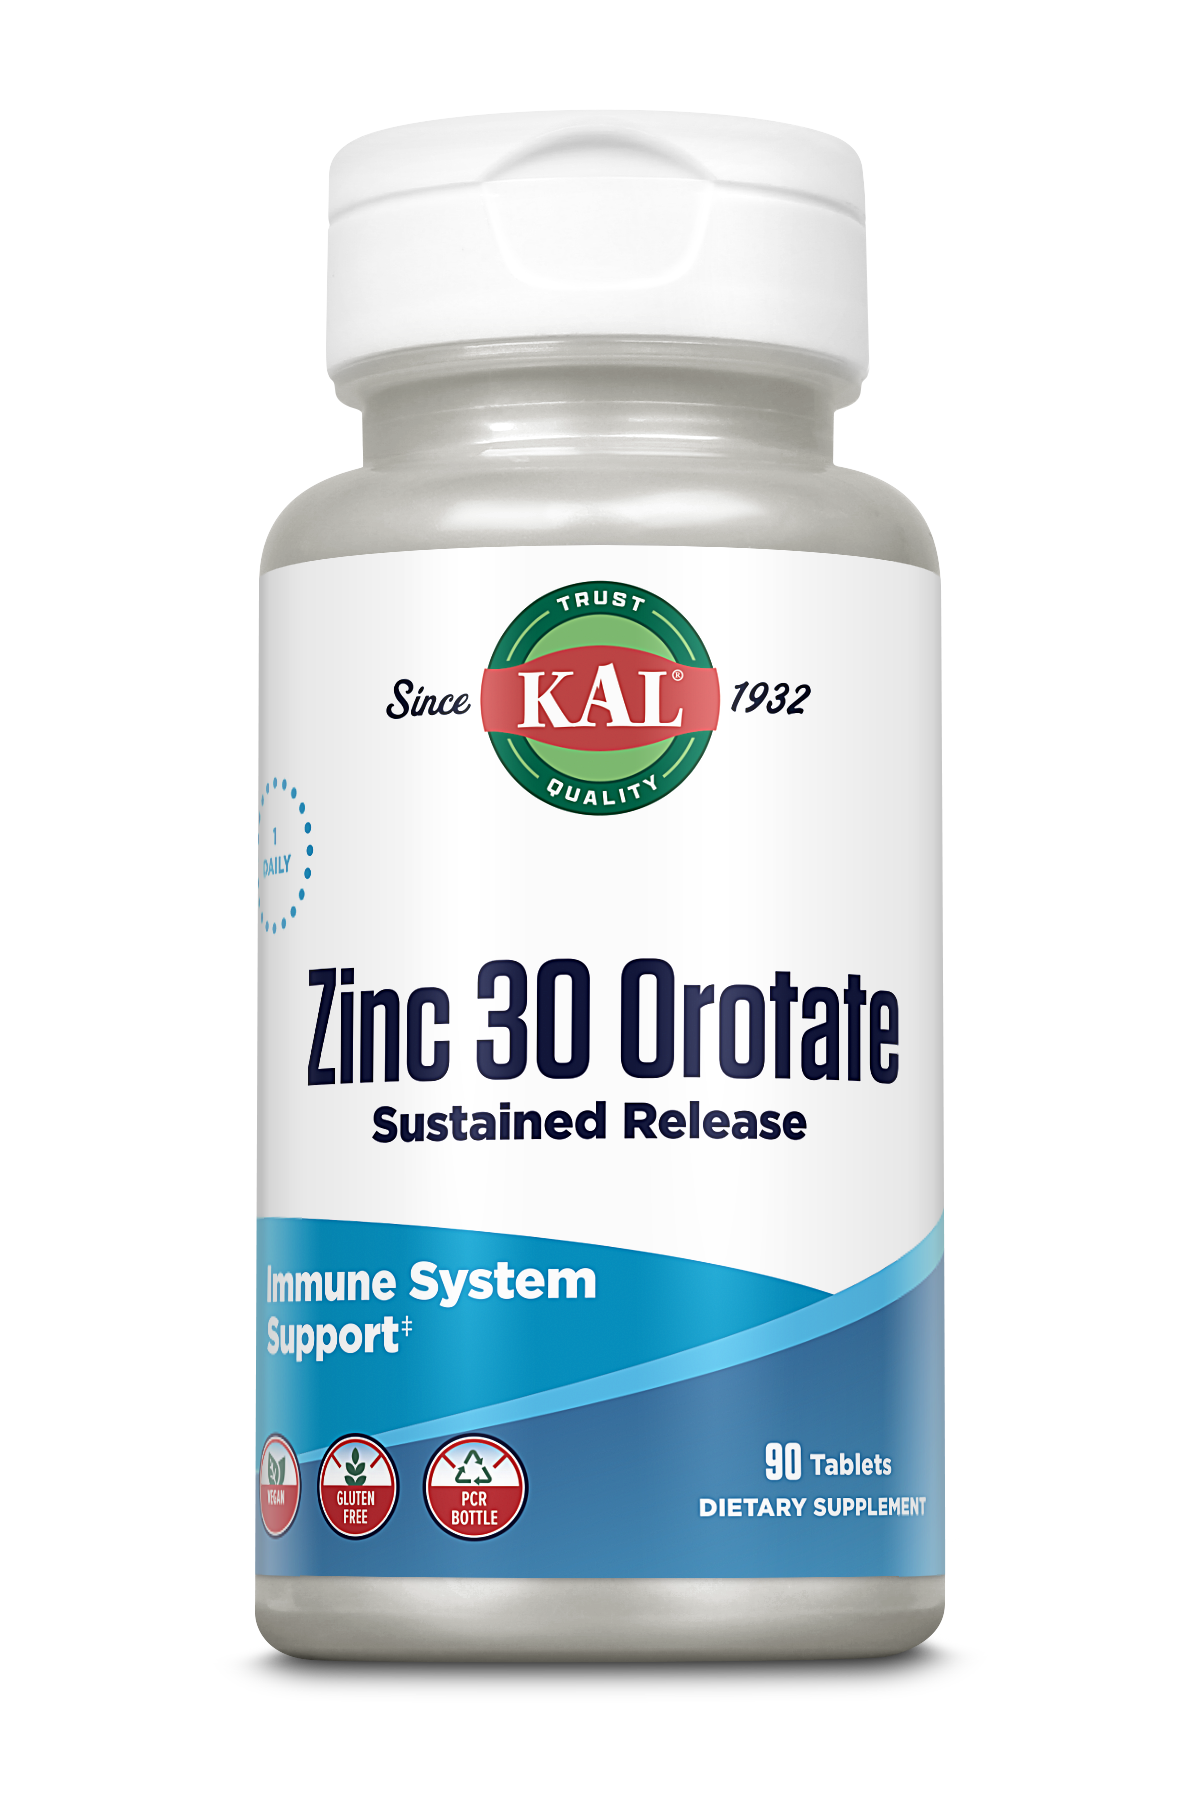 verdad Drama Decorativo Zinc 30 Orotate Sustained Release Tablets